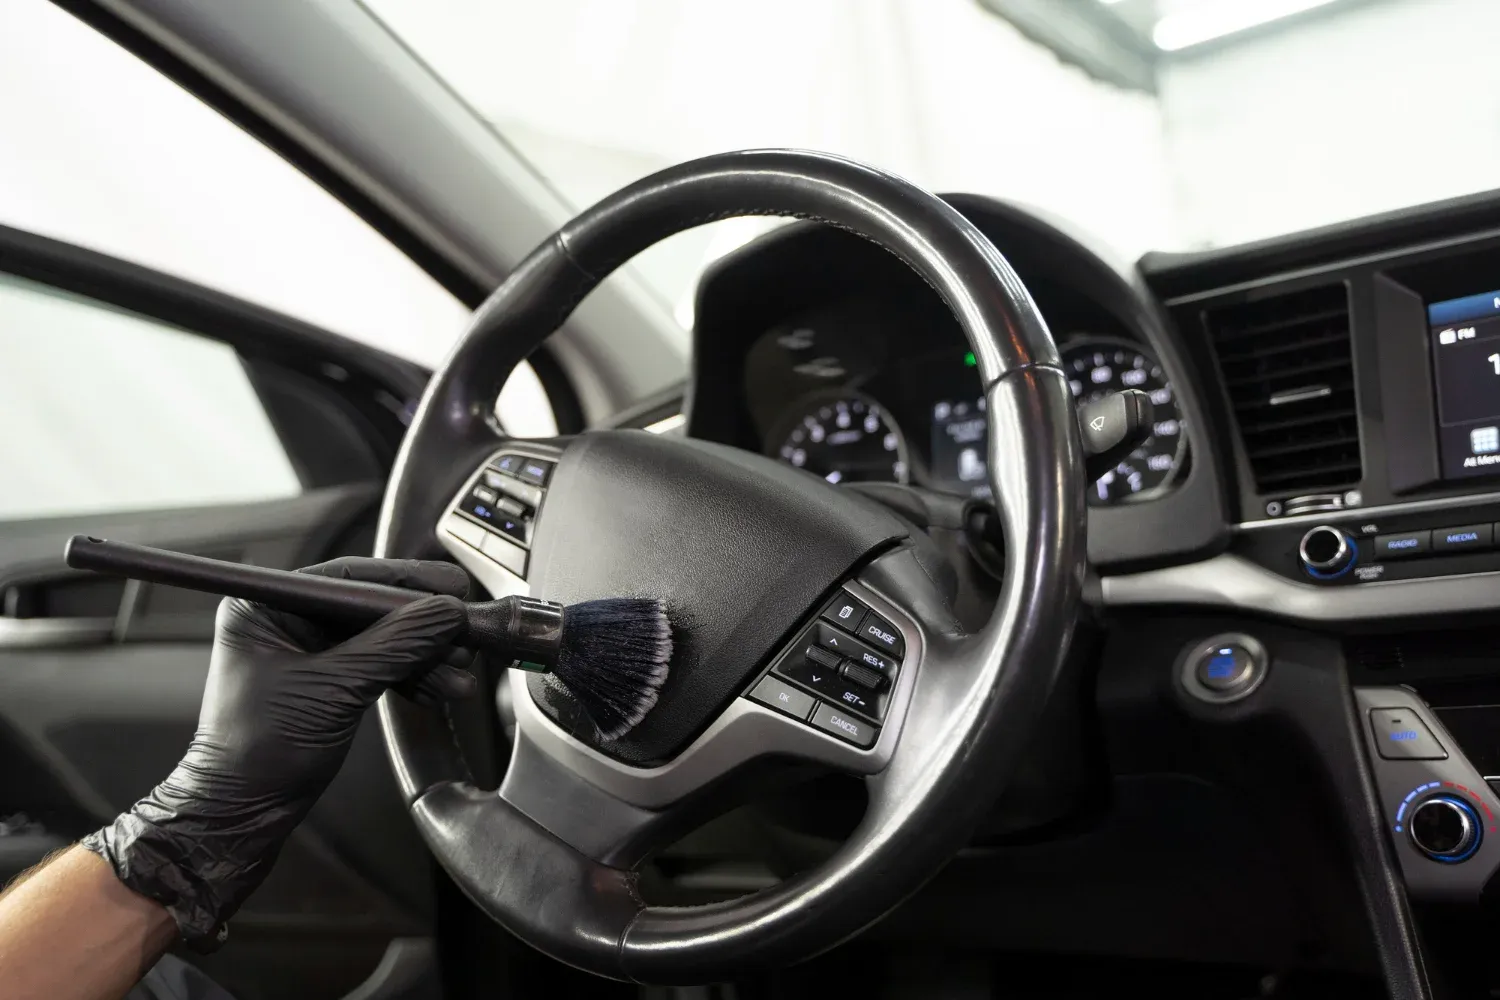 VEHICLE & CAR INTERIOR CLEANING COMPANY IN ABBOTSFORD, BC